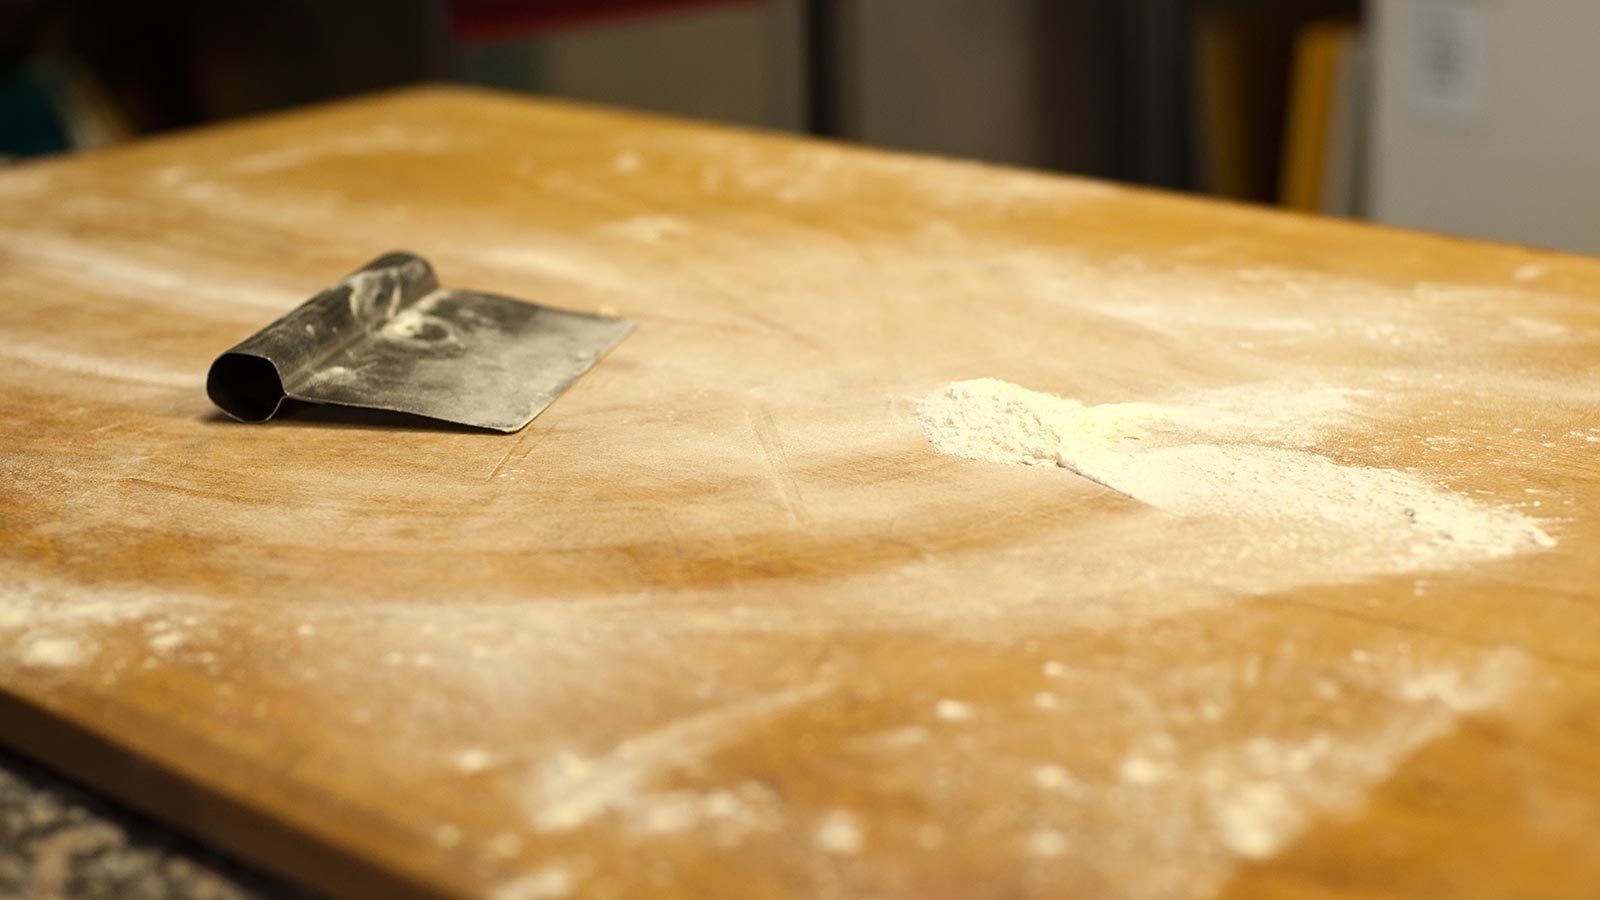 A work surface covered in flour ready for baking bread